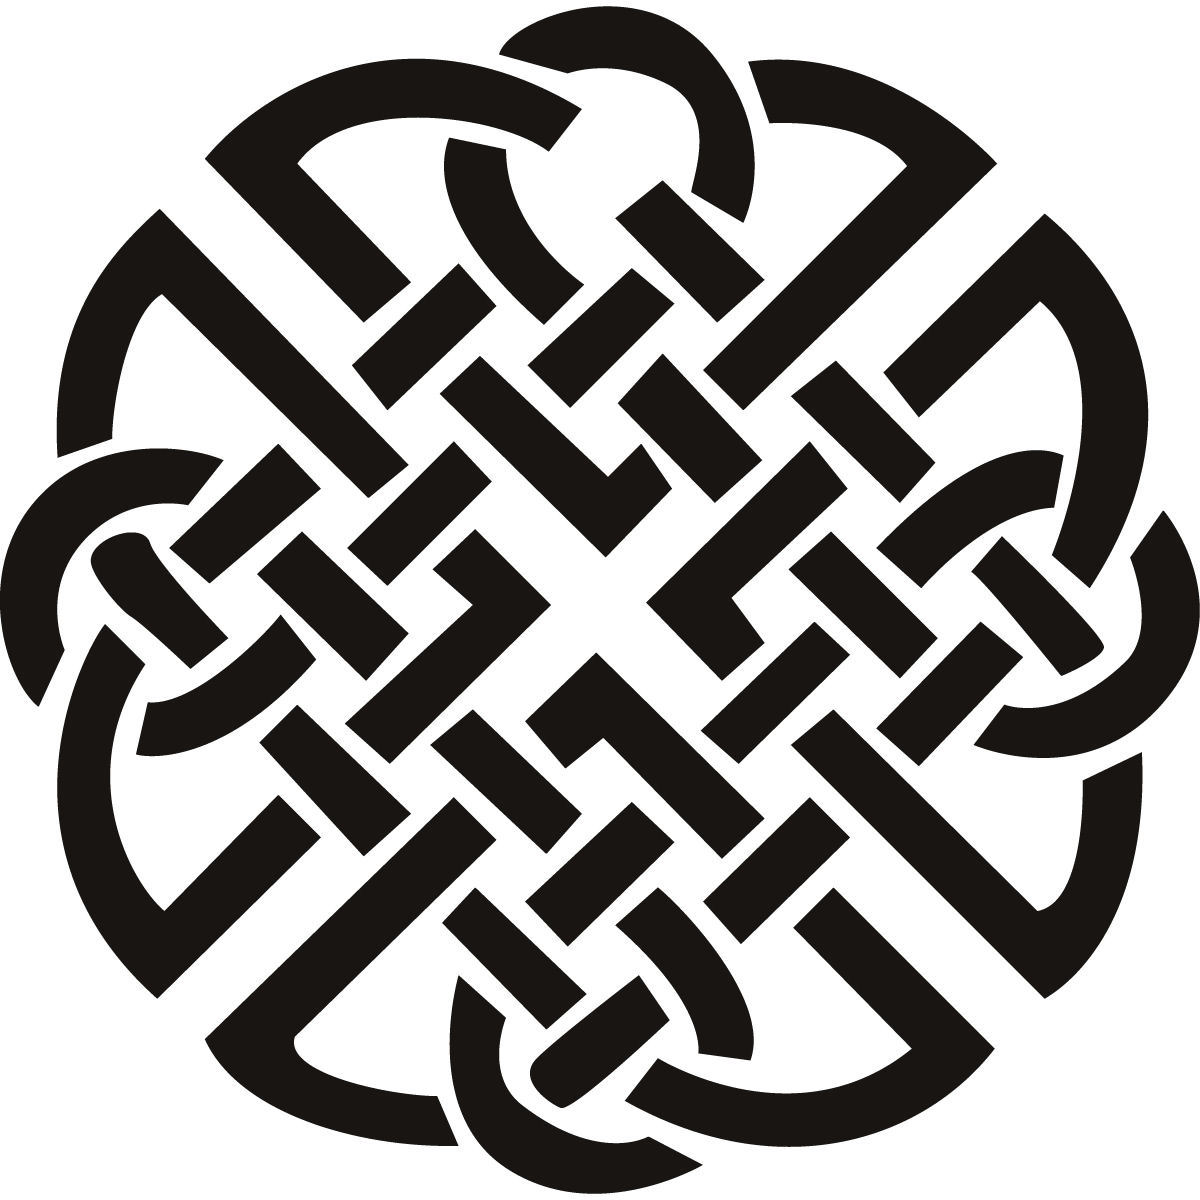 Free Celtic Knot, Download Free Clip Art, Free Clip Art on.